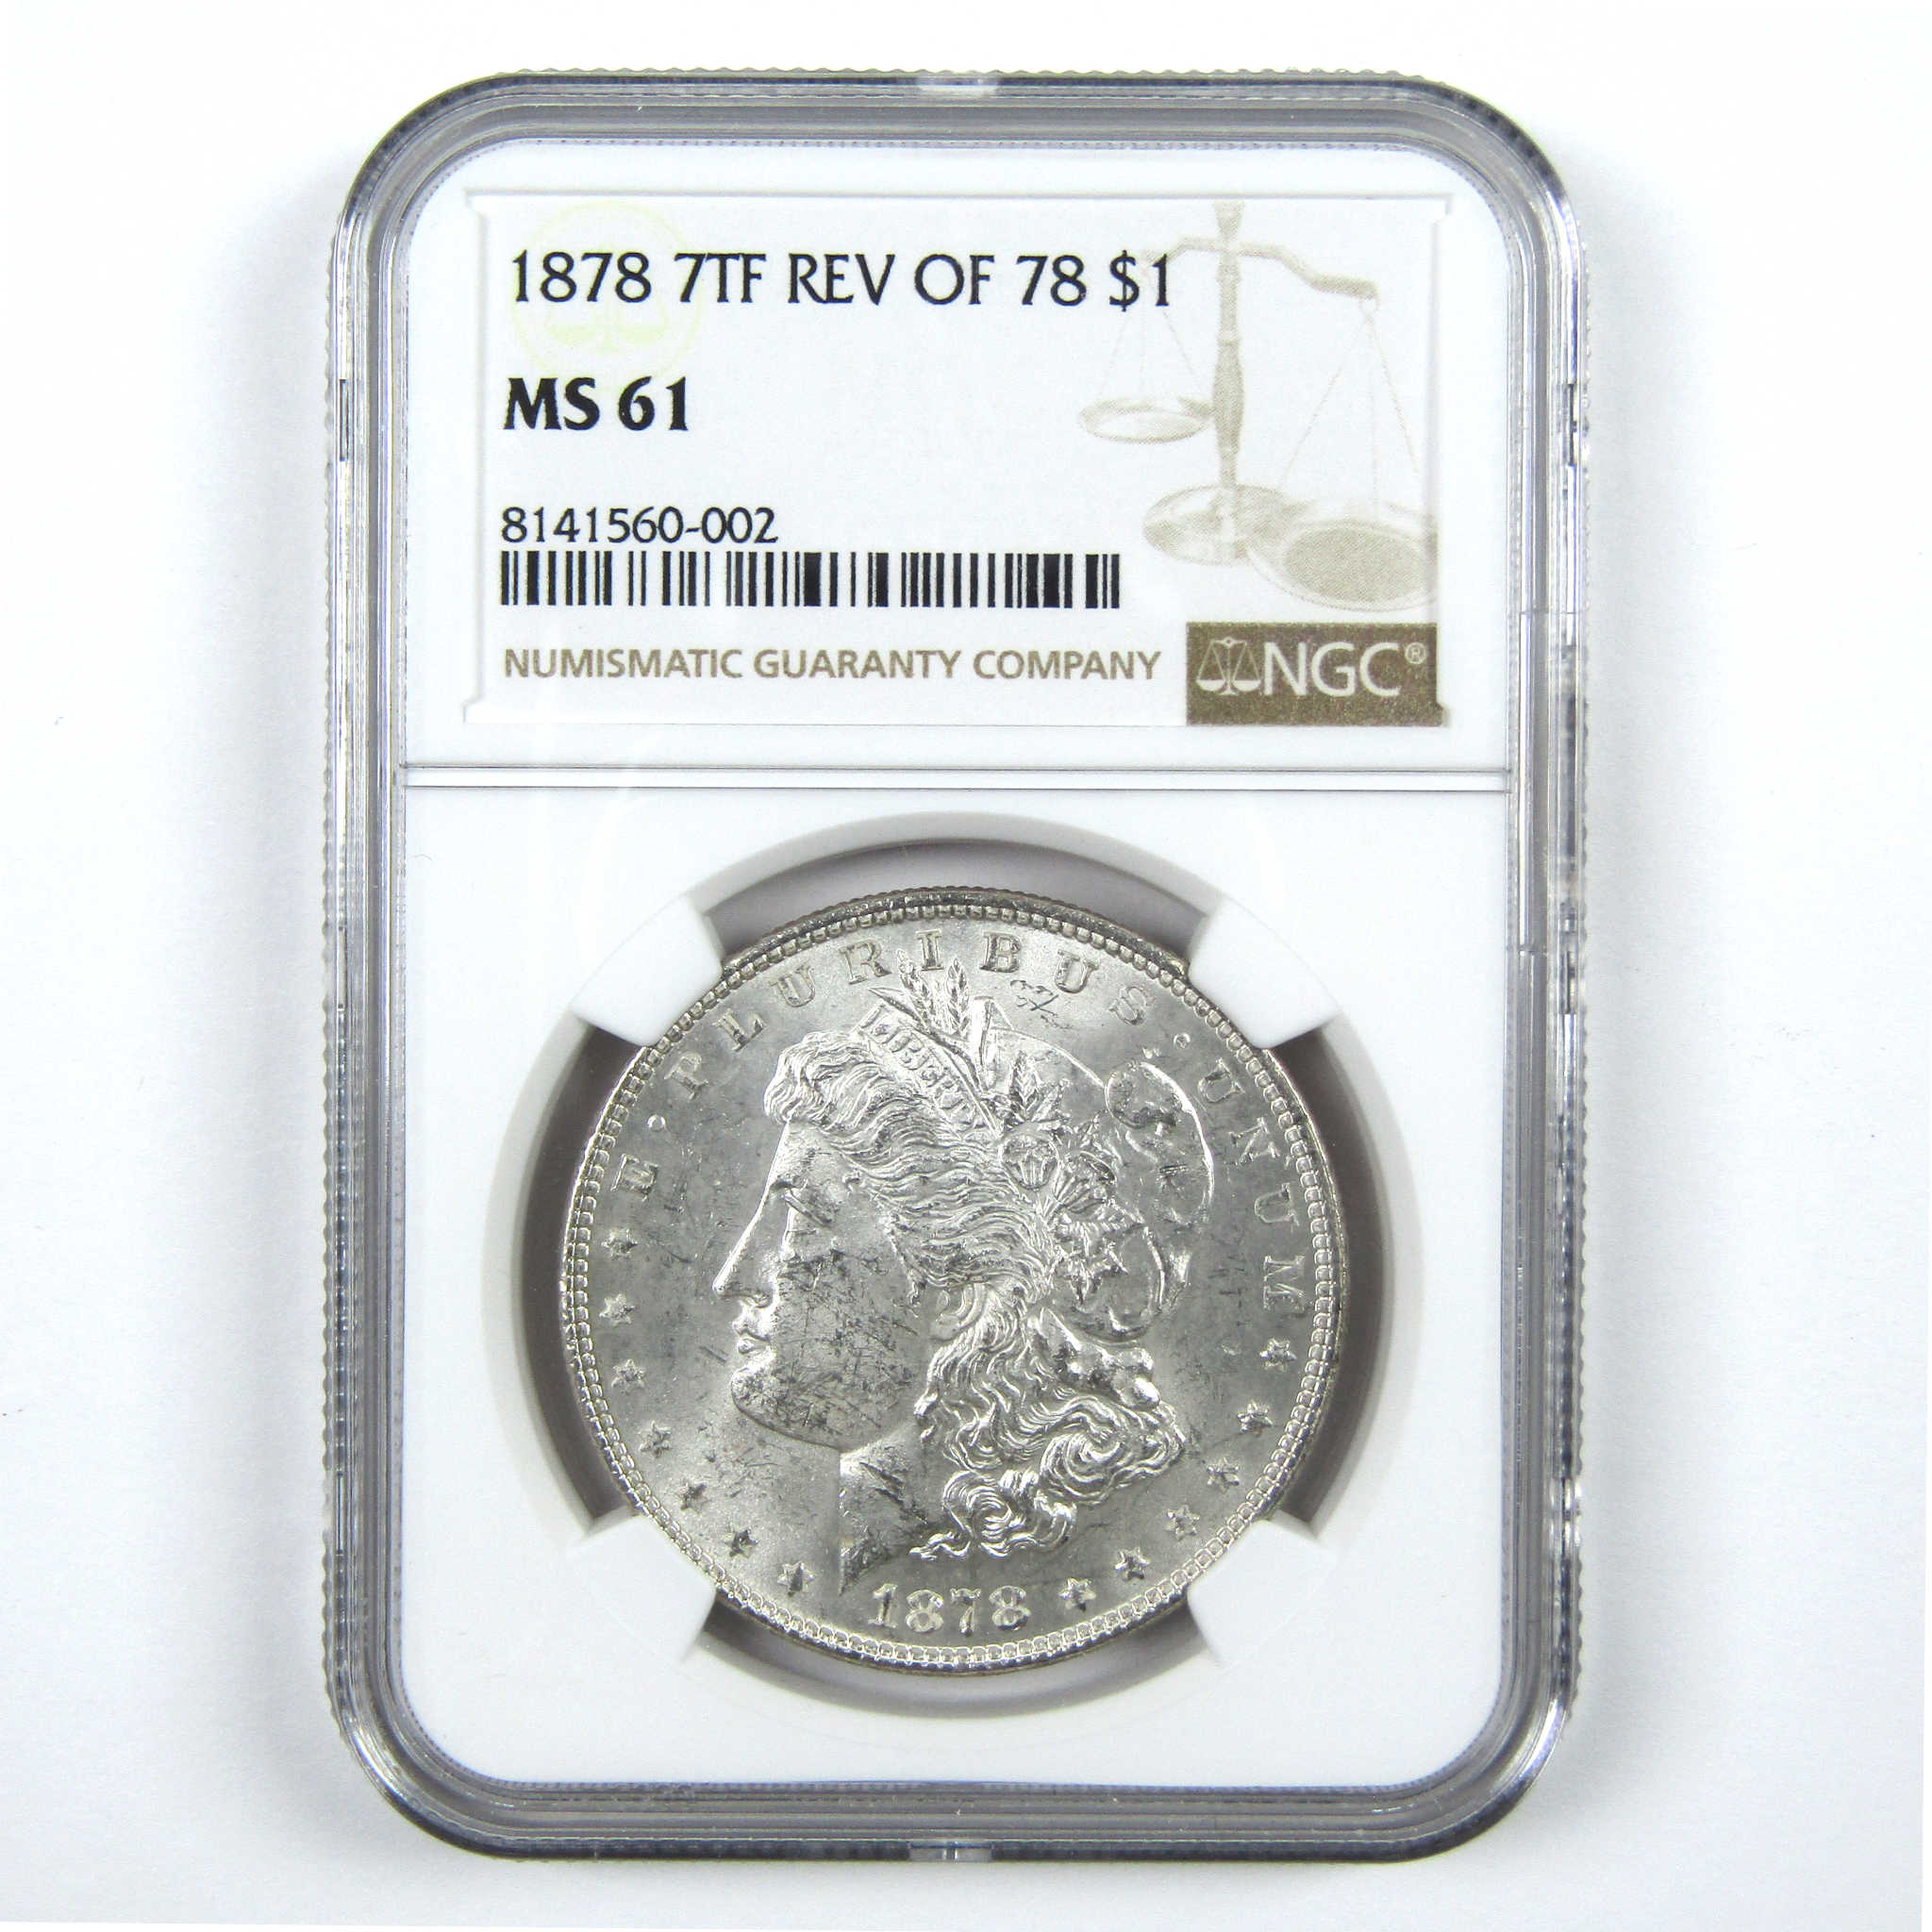 1878 7TF Rev 78 Morgan Dollar MS 61 NGC Uncirculated SKU:I14027 - Morgan coin - Morgan silver dollar - Morgan silver dollar for sale - Profile Coins &amp; Collectibles